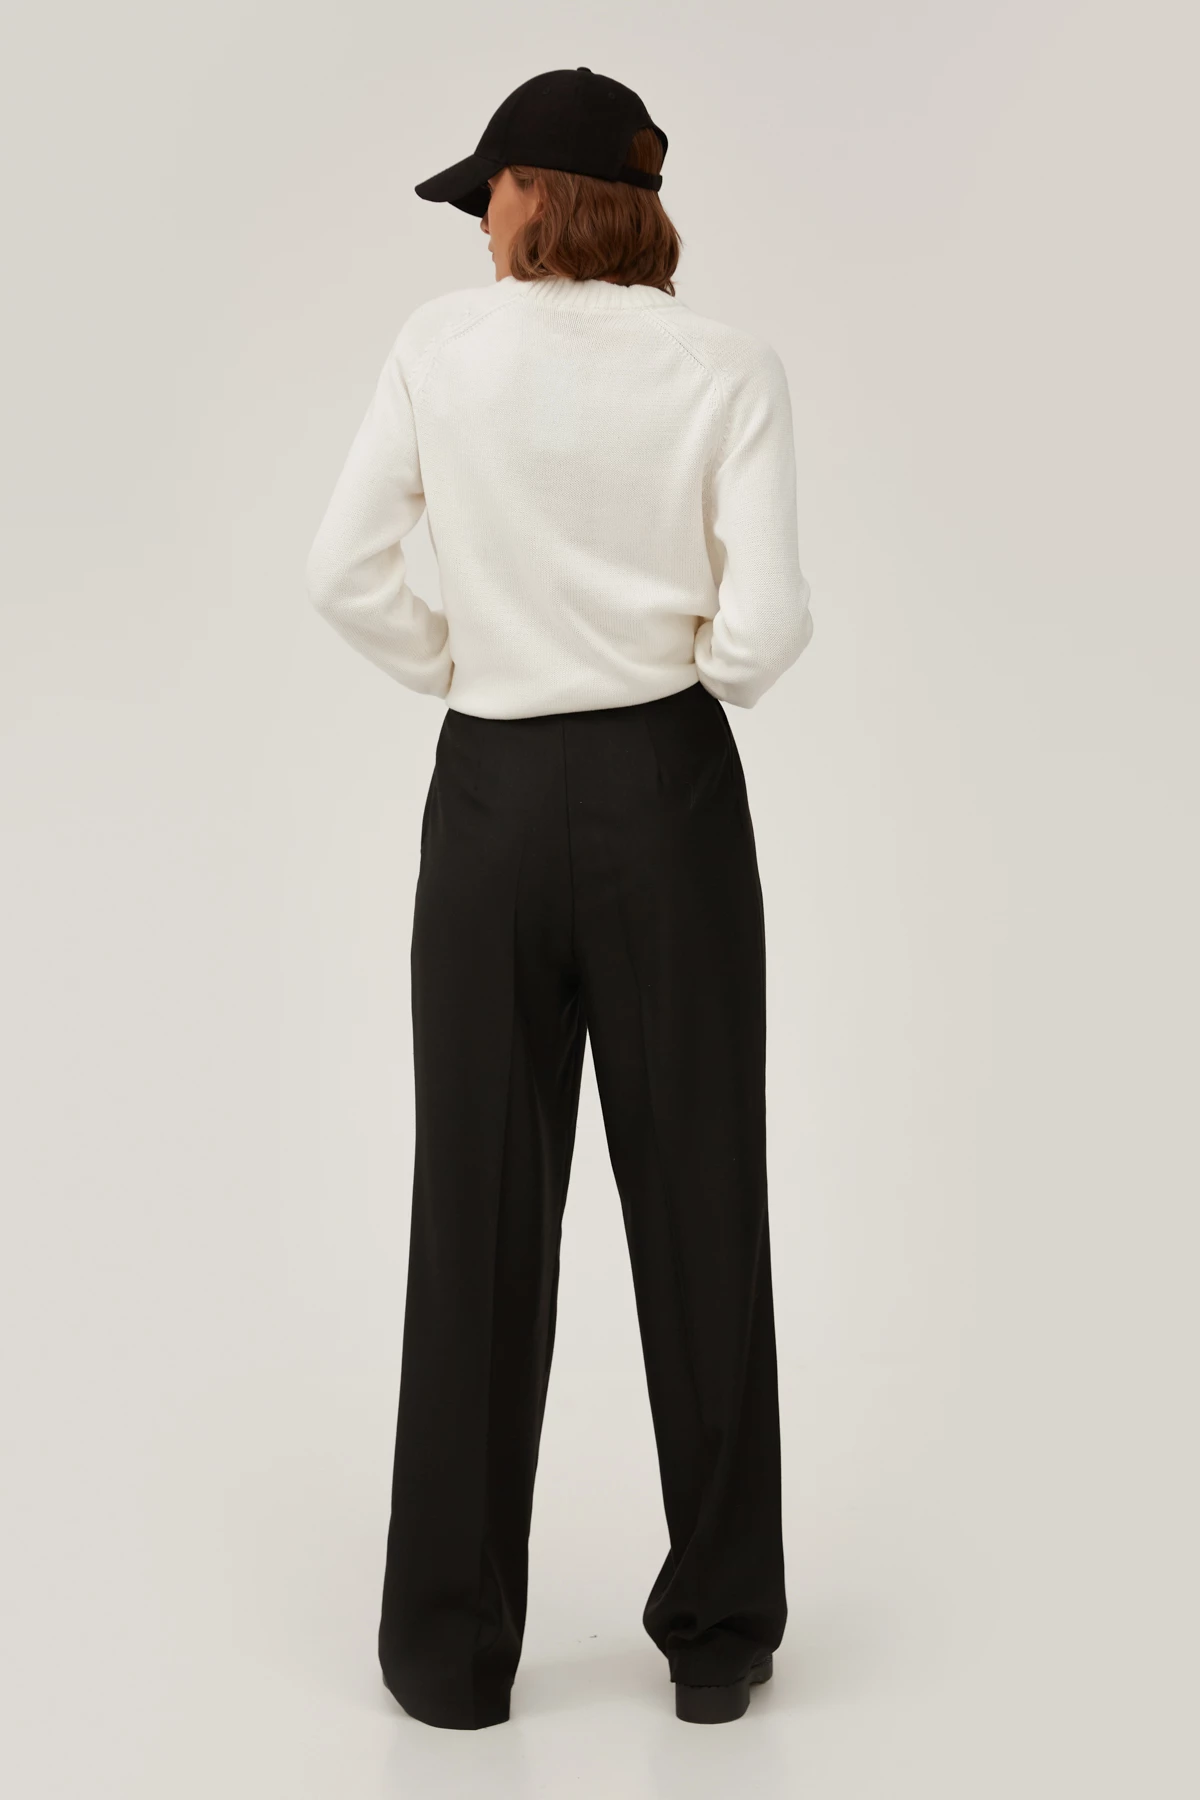 Black elongated trousers with wool, photo 3